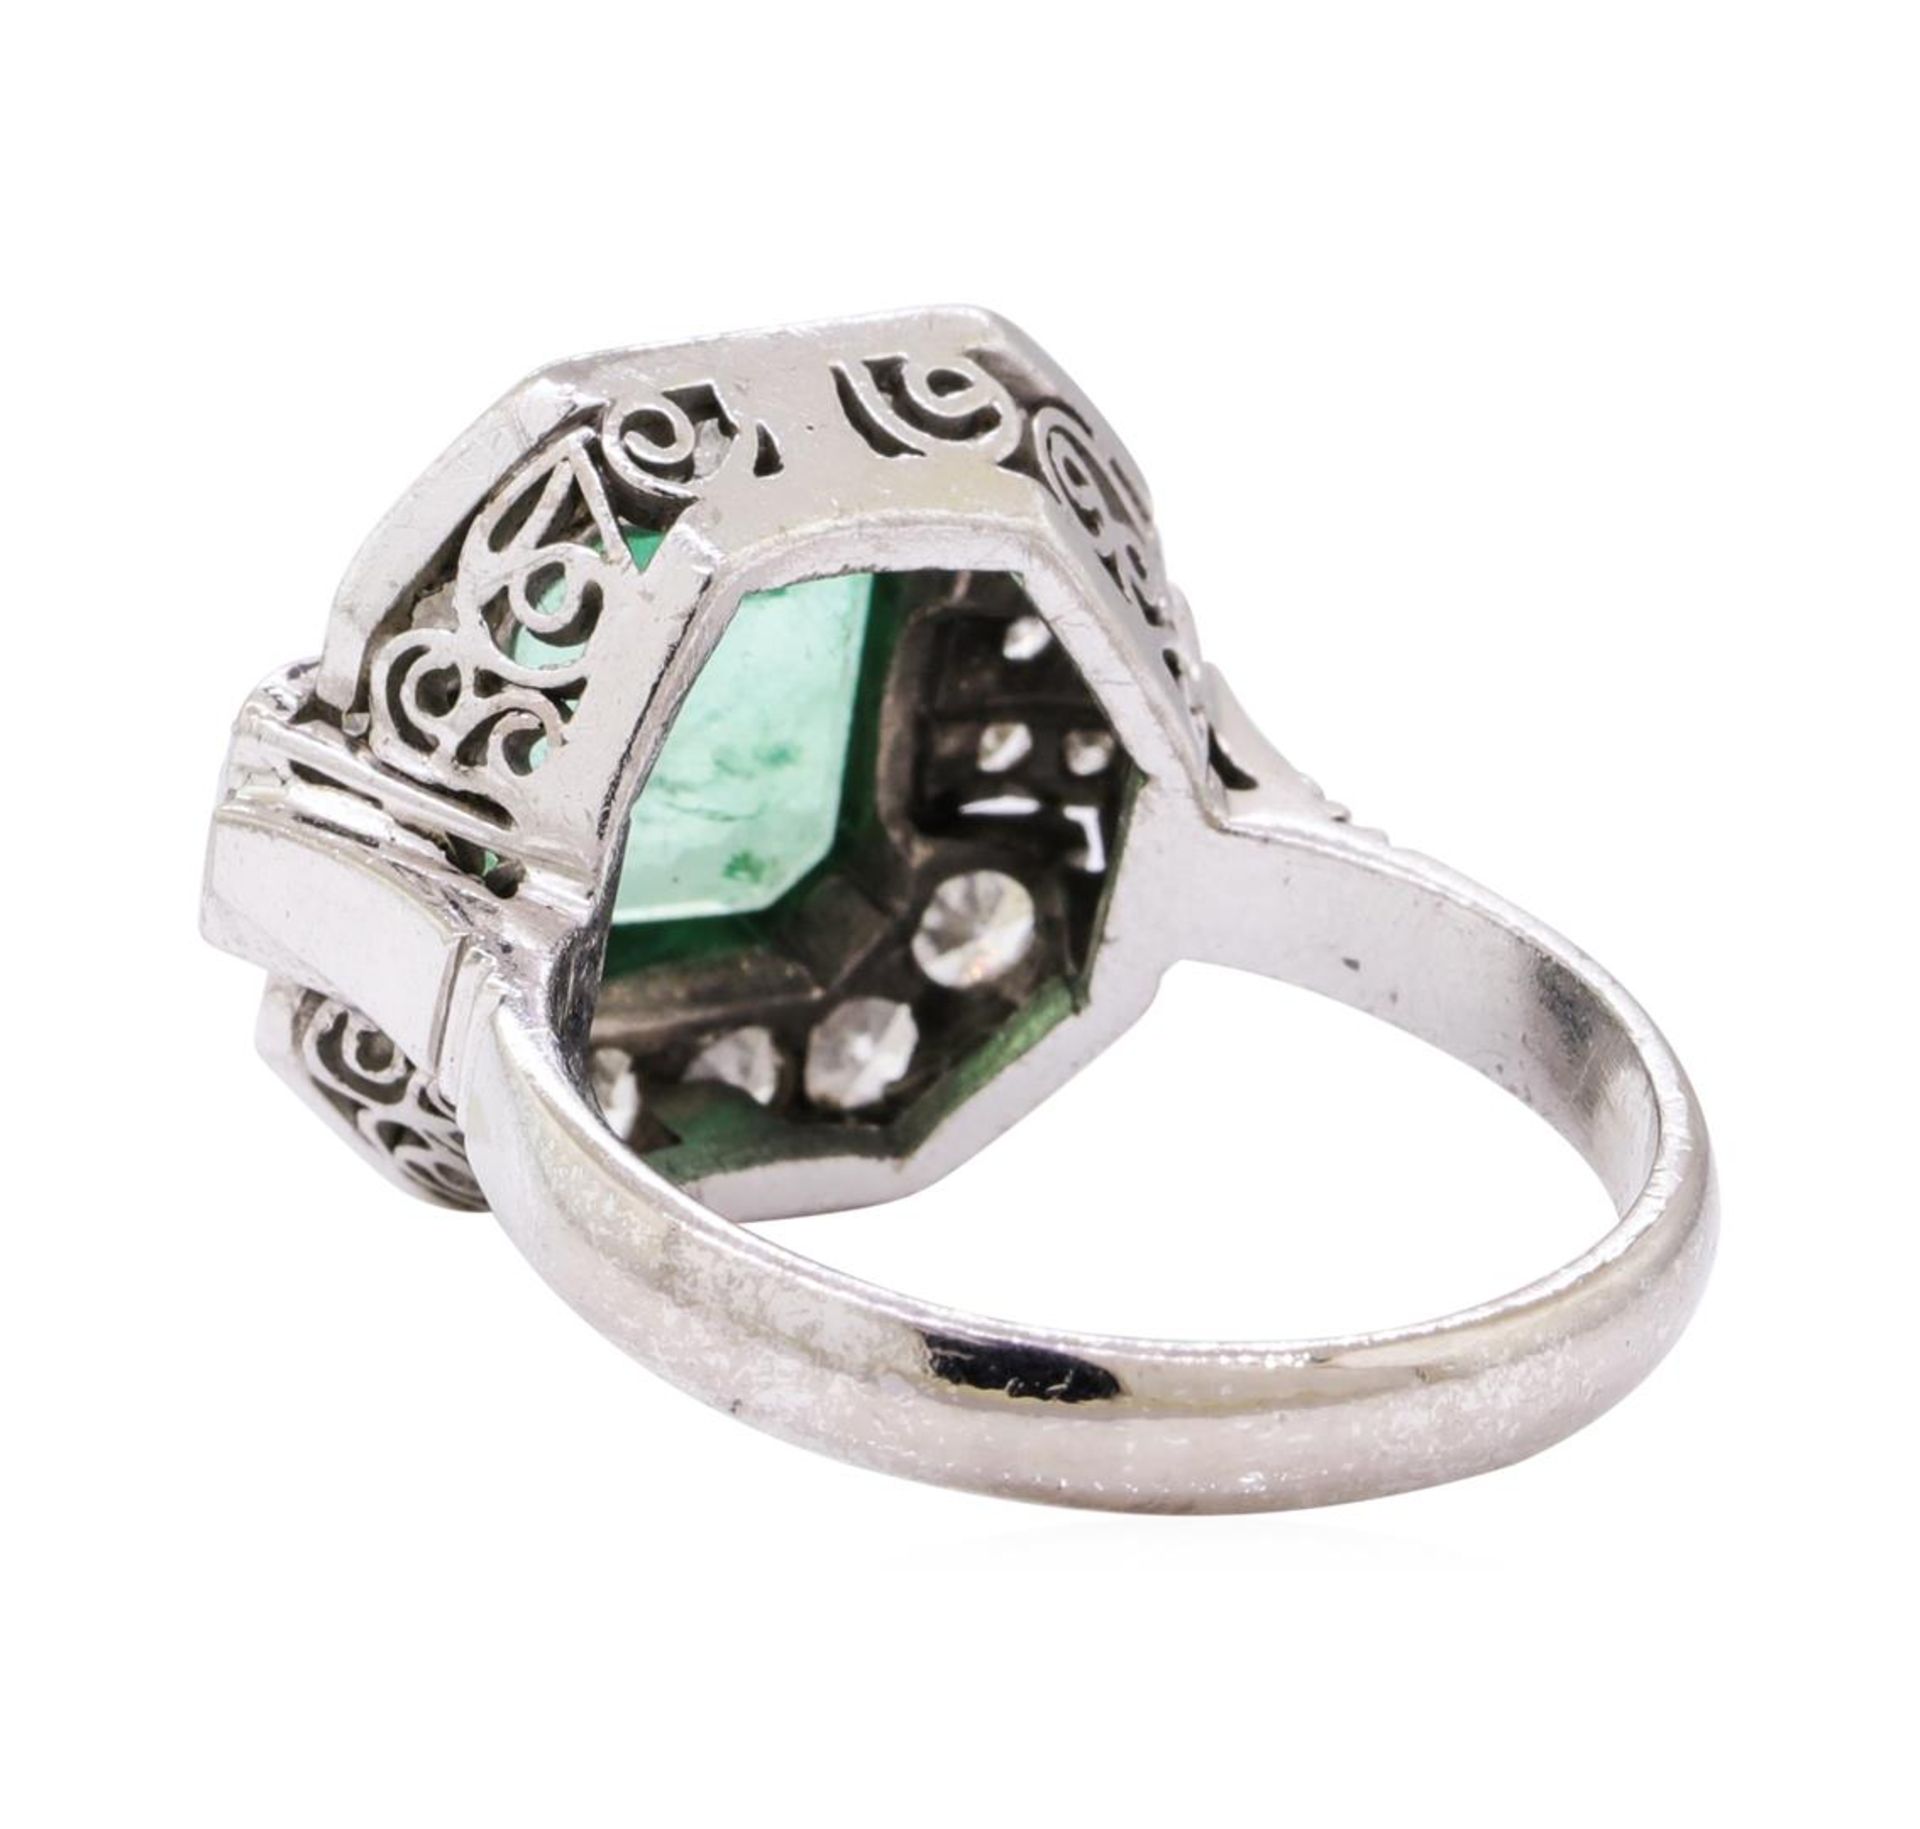 7.80 ctw Emerald And Diamond Ring And Earrings - 14KT White Gold - Image 3 of 7